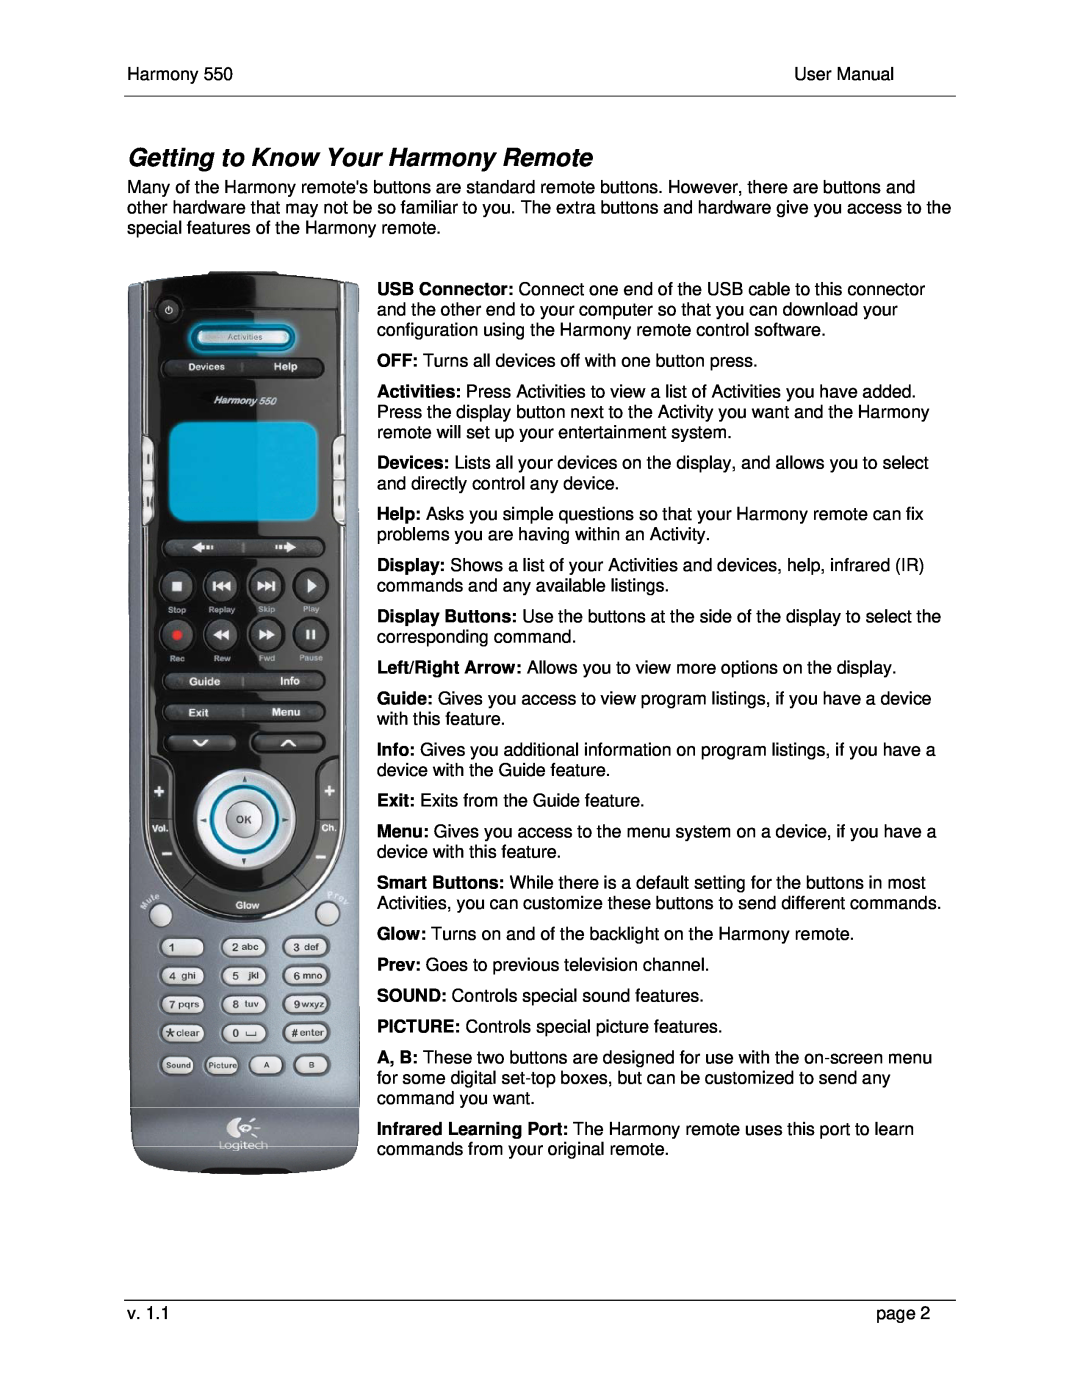 Logitech 550 user manual Getting to Know Your Harmony Remote 